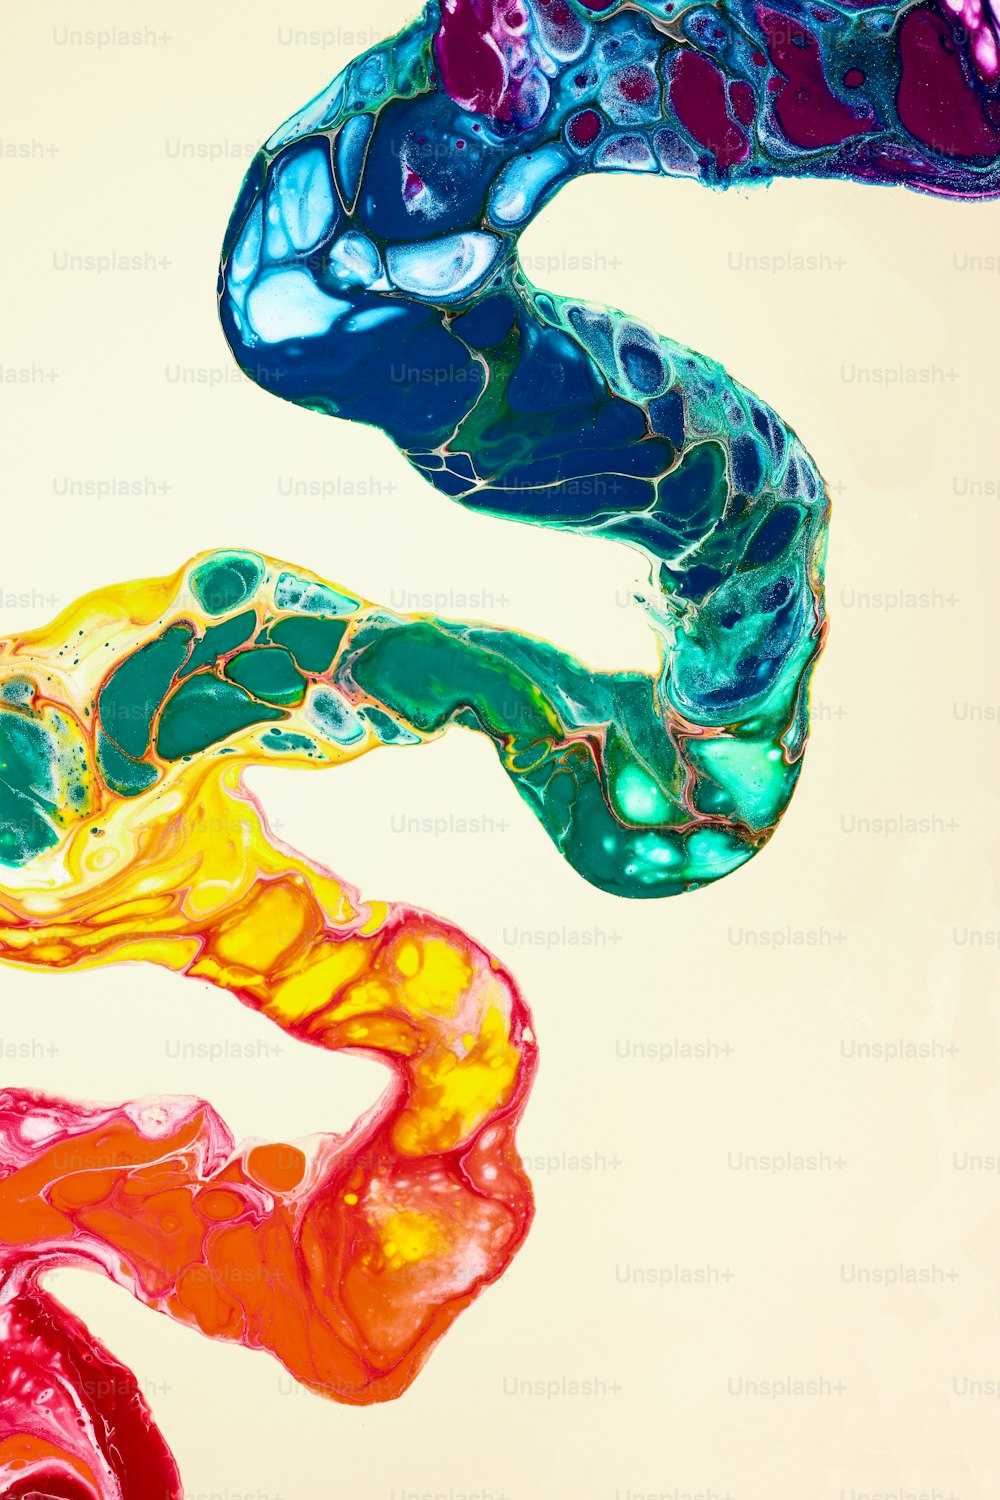 an abstract painting of different colors of liquid